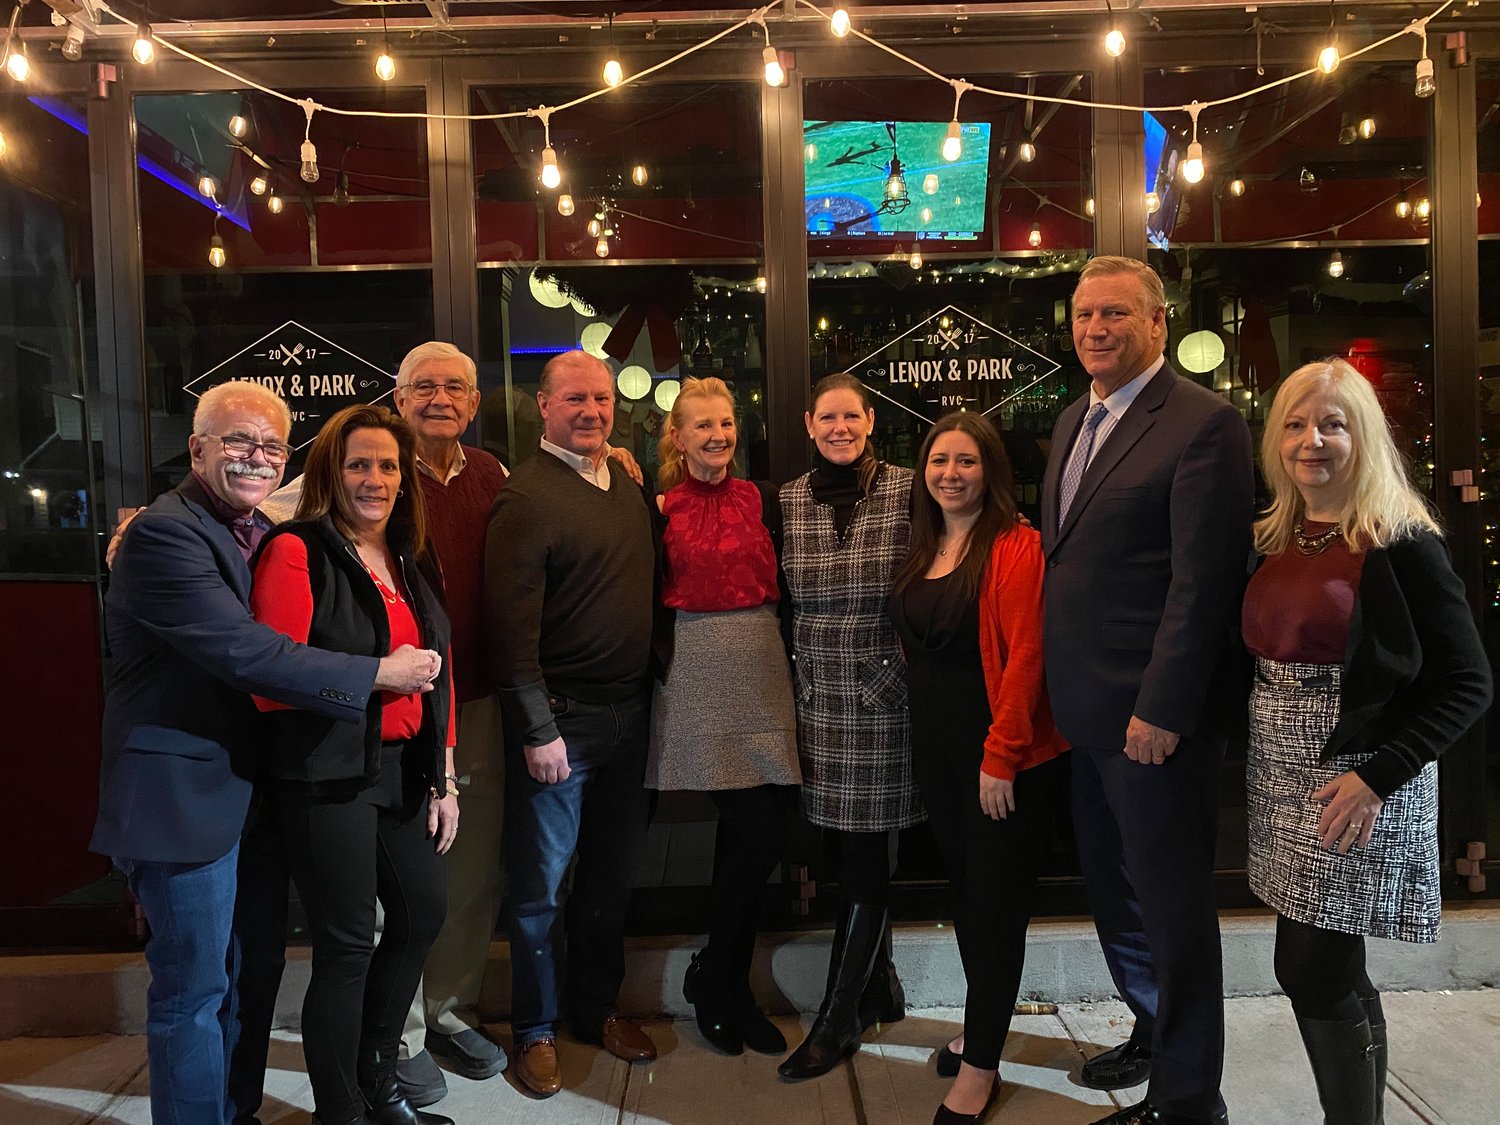 Chamber of Commerce members, from left, Jeff Novack, Carol O’Leary, Treasurer Ed Asip, President Brian Croutier, incoming President Lisa Umansku, Donna O’Rielly Eineman, Jillian Weston, Tom Bogue, and Iyna Caruso outside of Lenox and Park Italian Bistro.